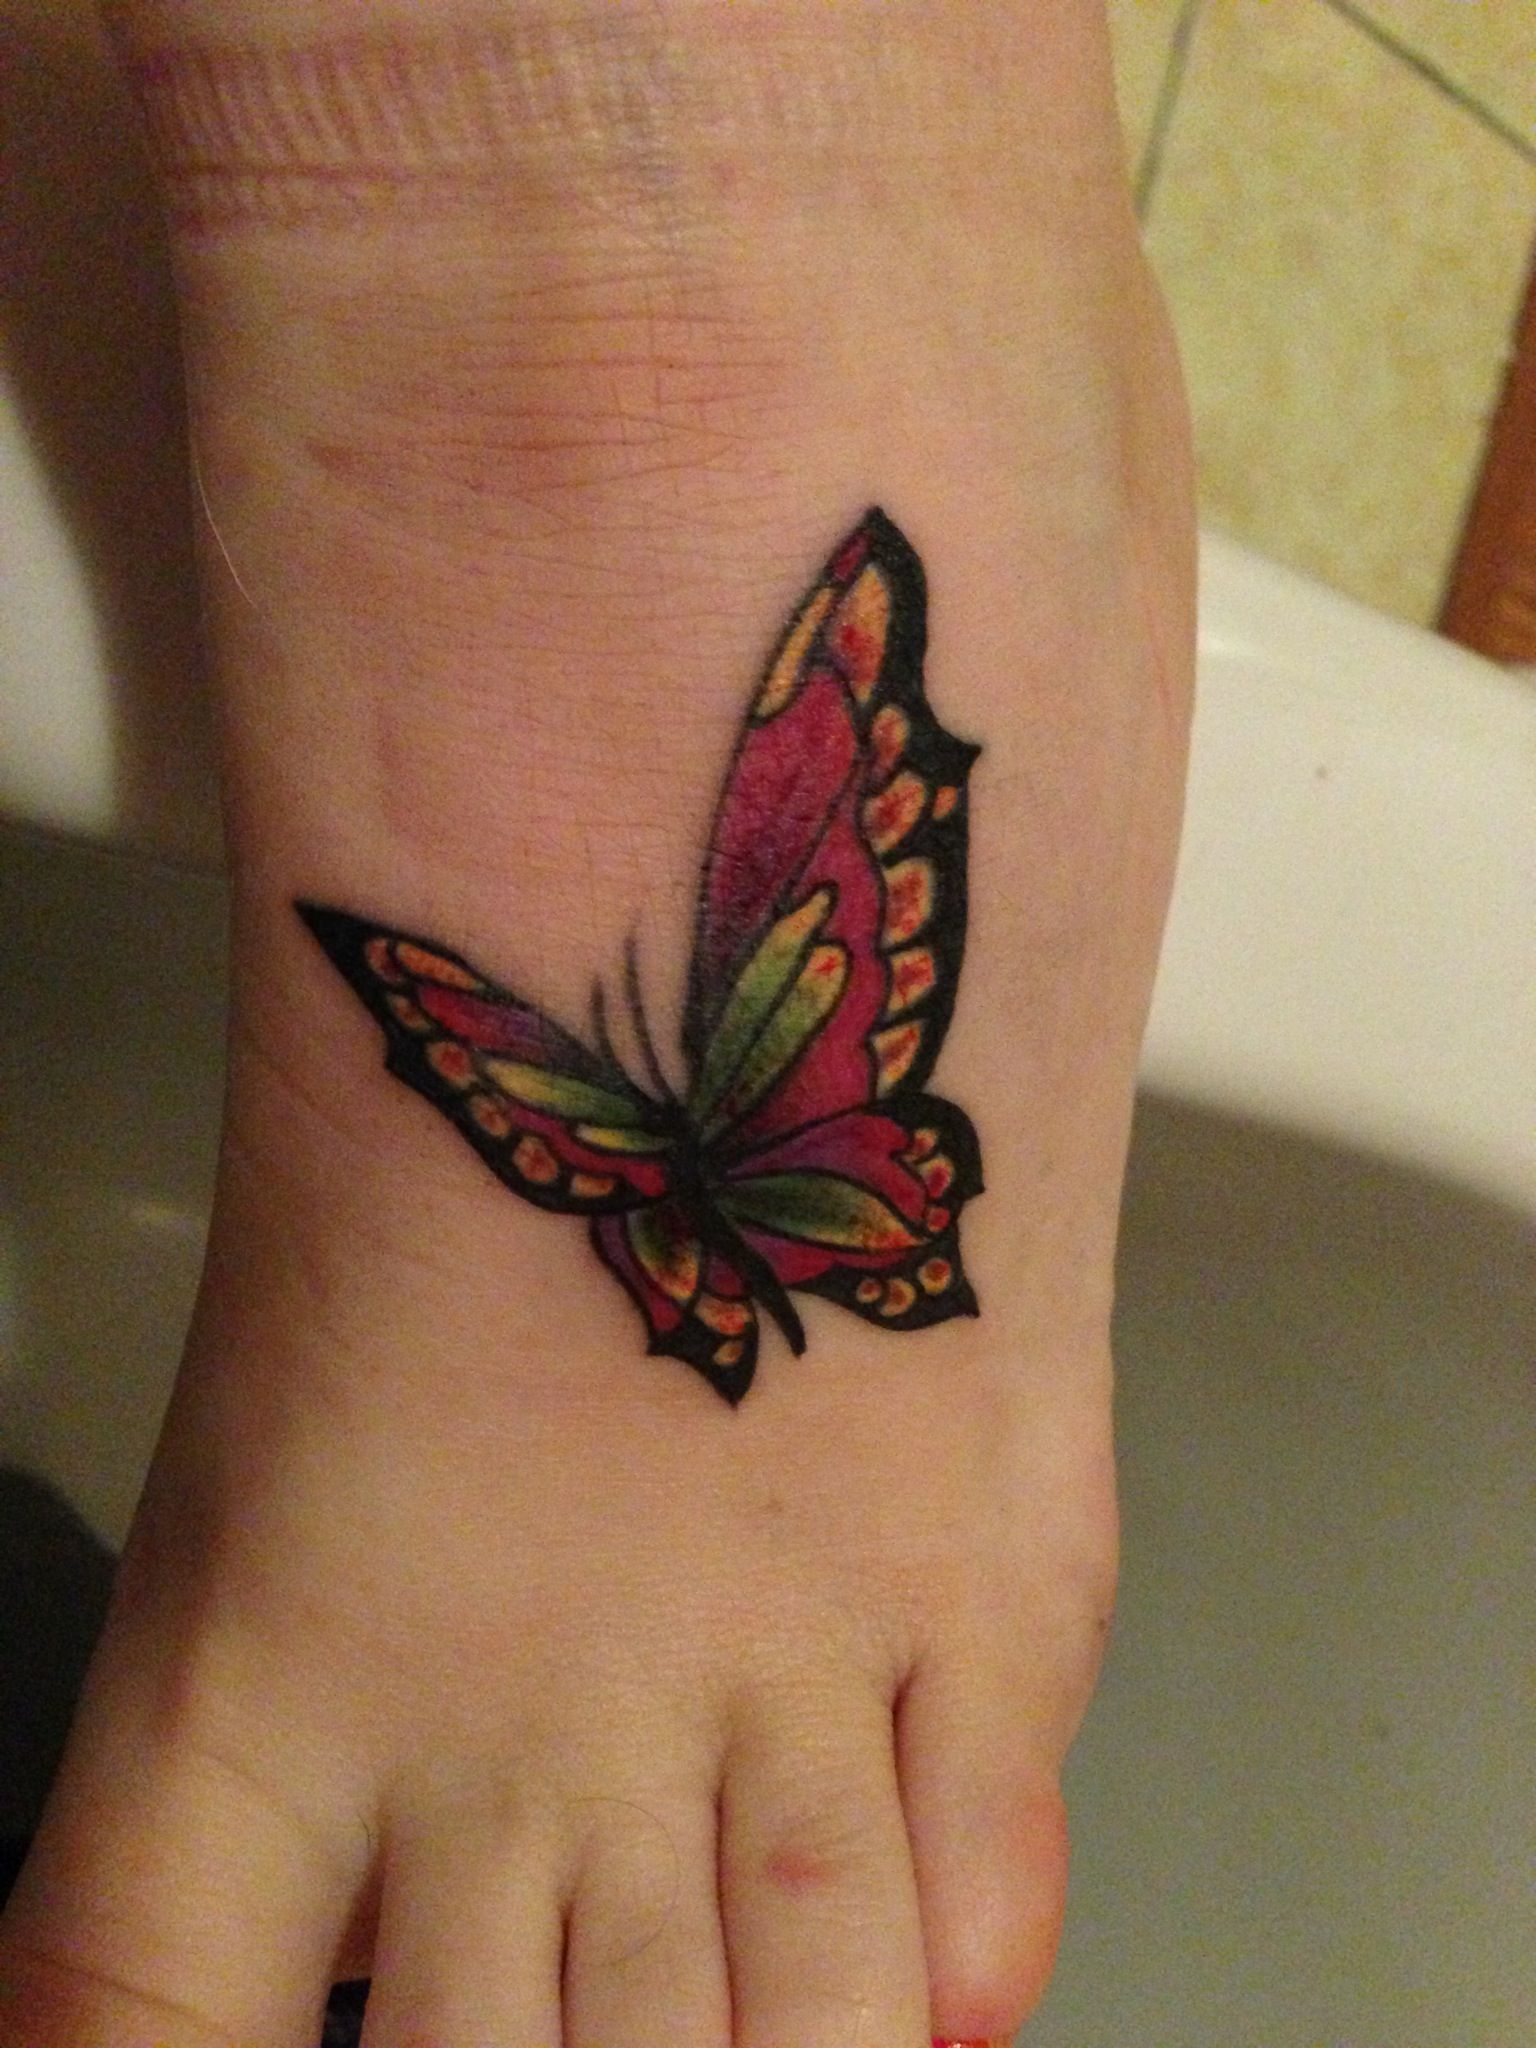 My New Butterfly Foot Tattoo Finishing Touches Swirls Etc At The within size 1536 X 2048